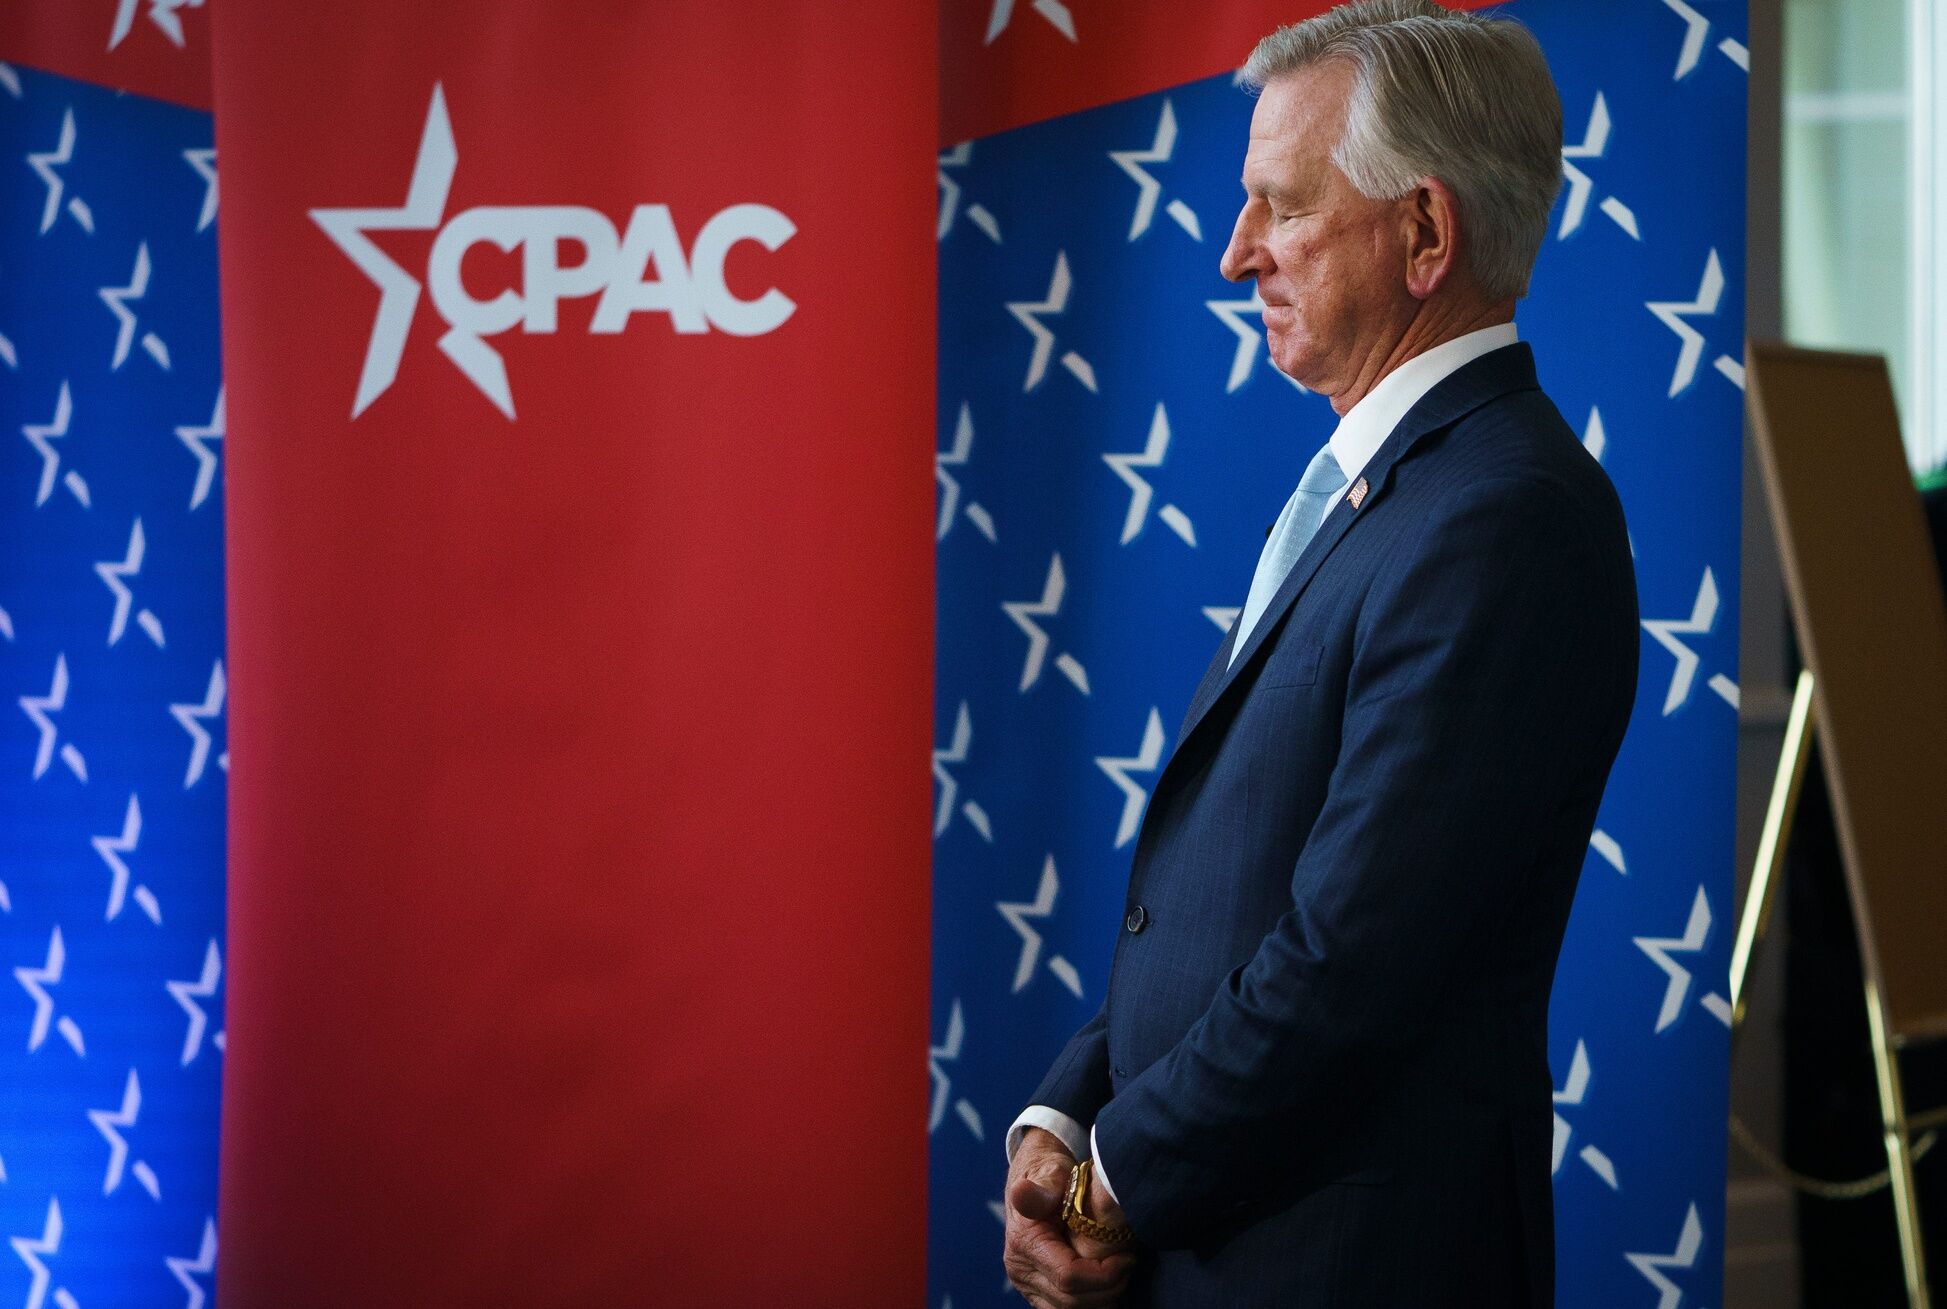 Senator Tommy Tuberville (R-AL) does media appearances outside of the CPAC convention hall prior to the start of the Conservative Political Action Conference